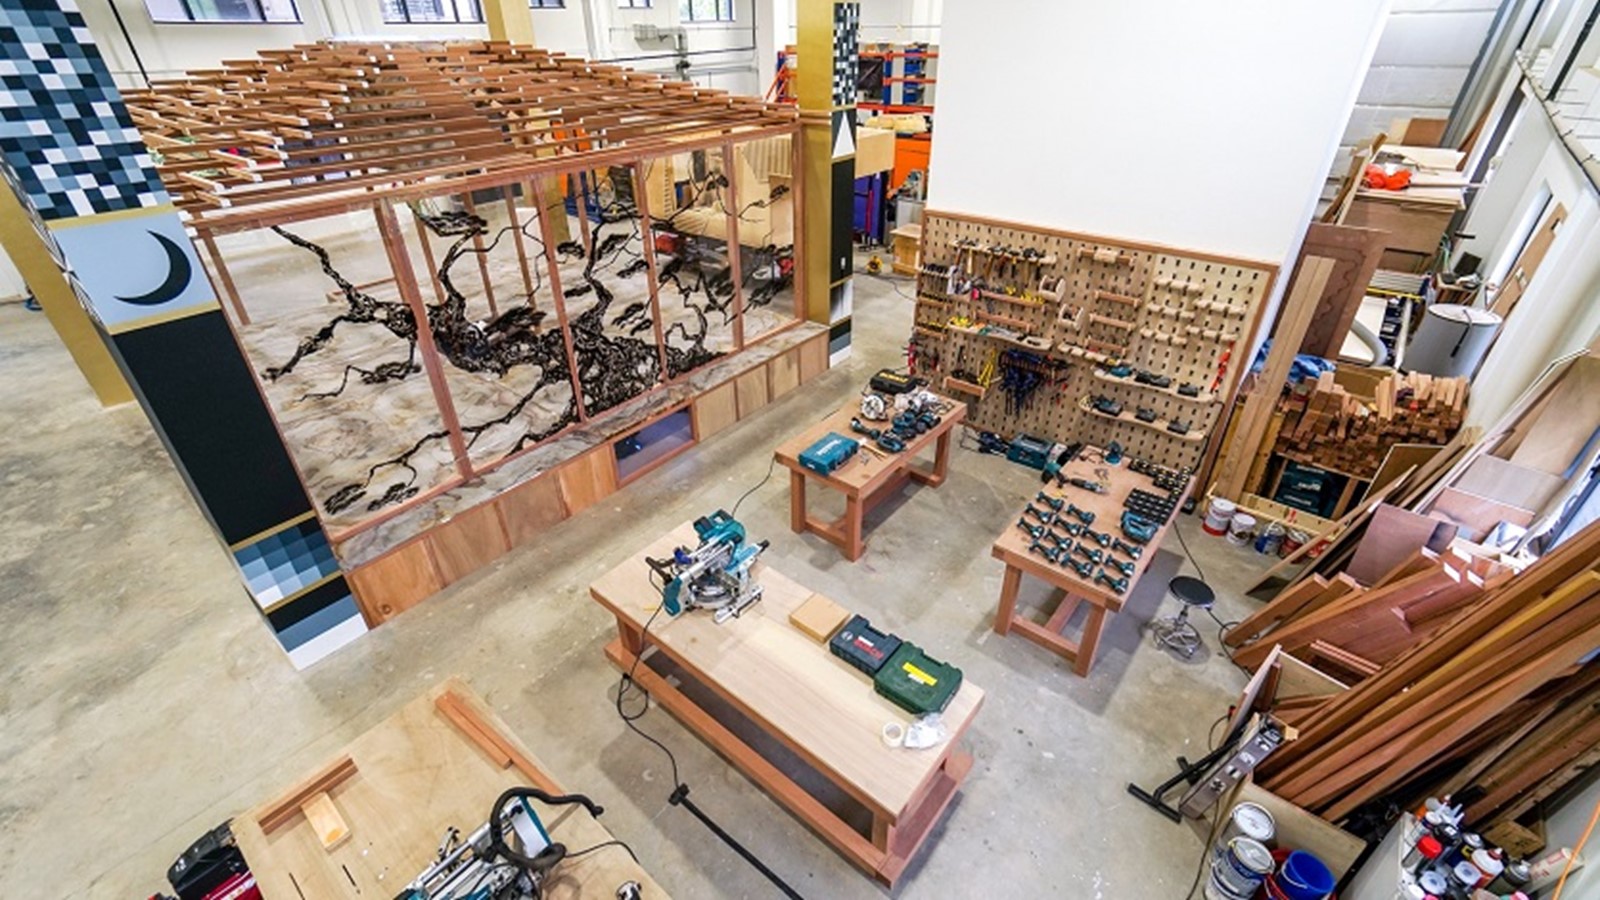 mFac, an experimental co-sharing makerspace 